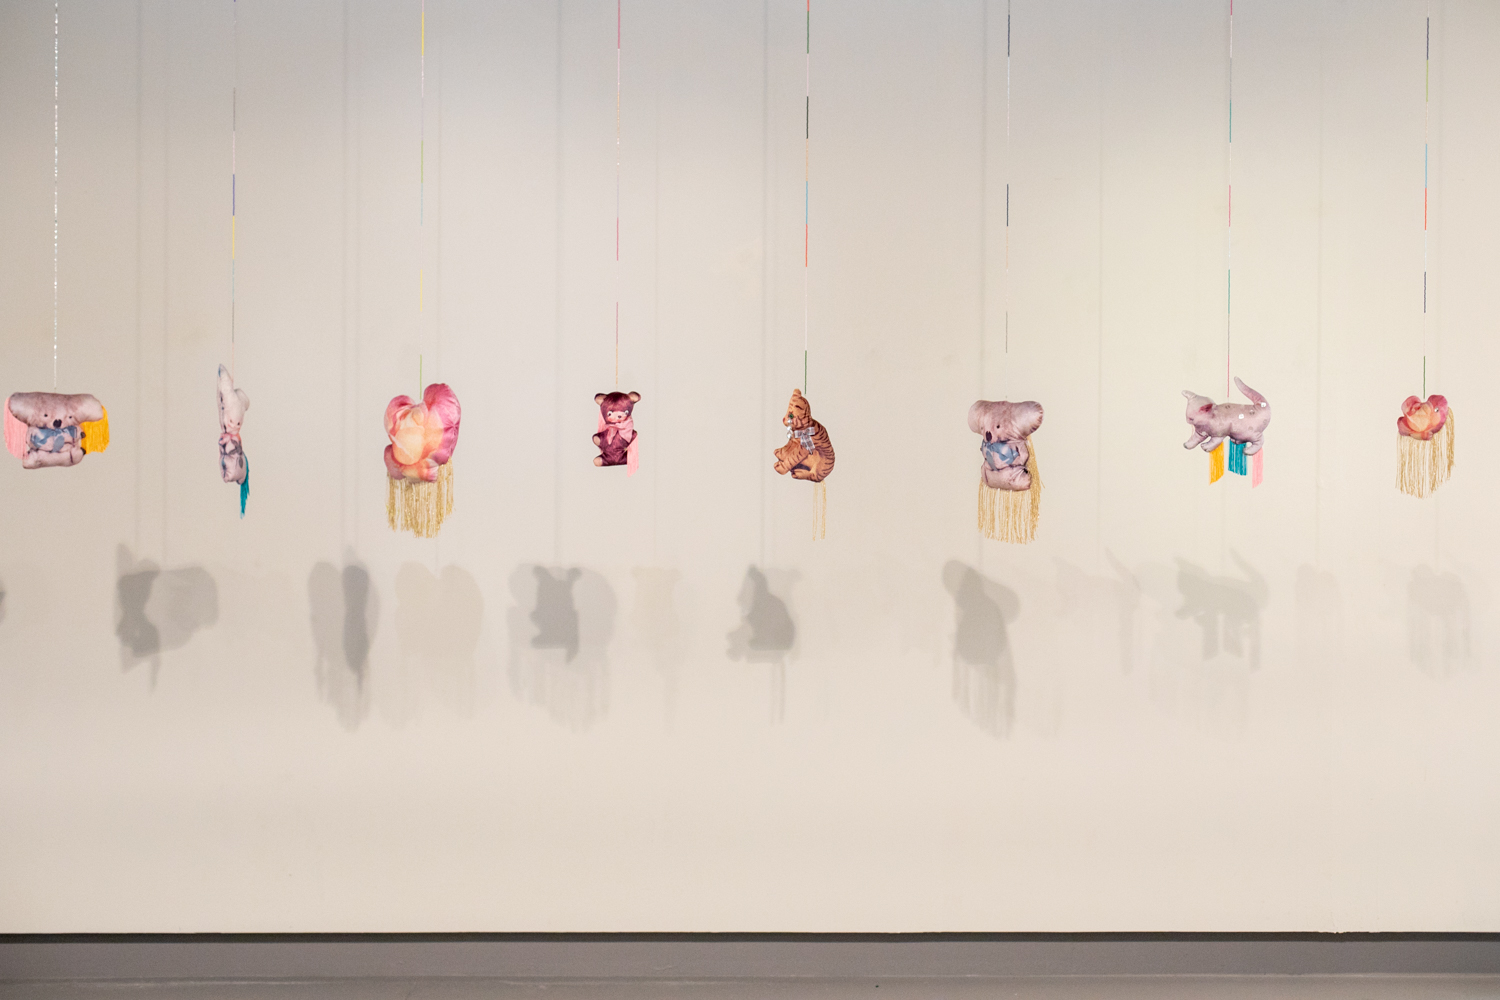  Holly Leonardson, 2019, found images digitally printed on velvet, wool stuffed, polyester fringing, glass beads, craft materials, dimensions variable.  Photography by Mel De Ruyter  